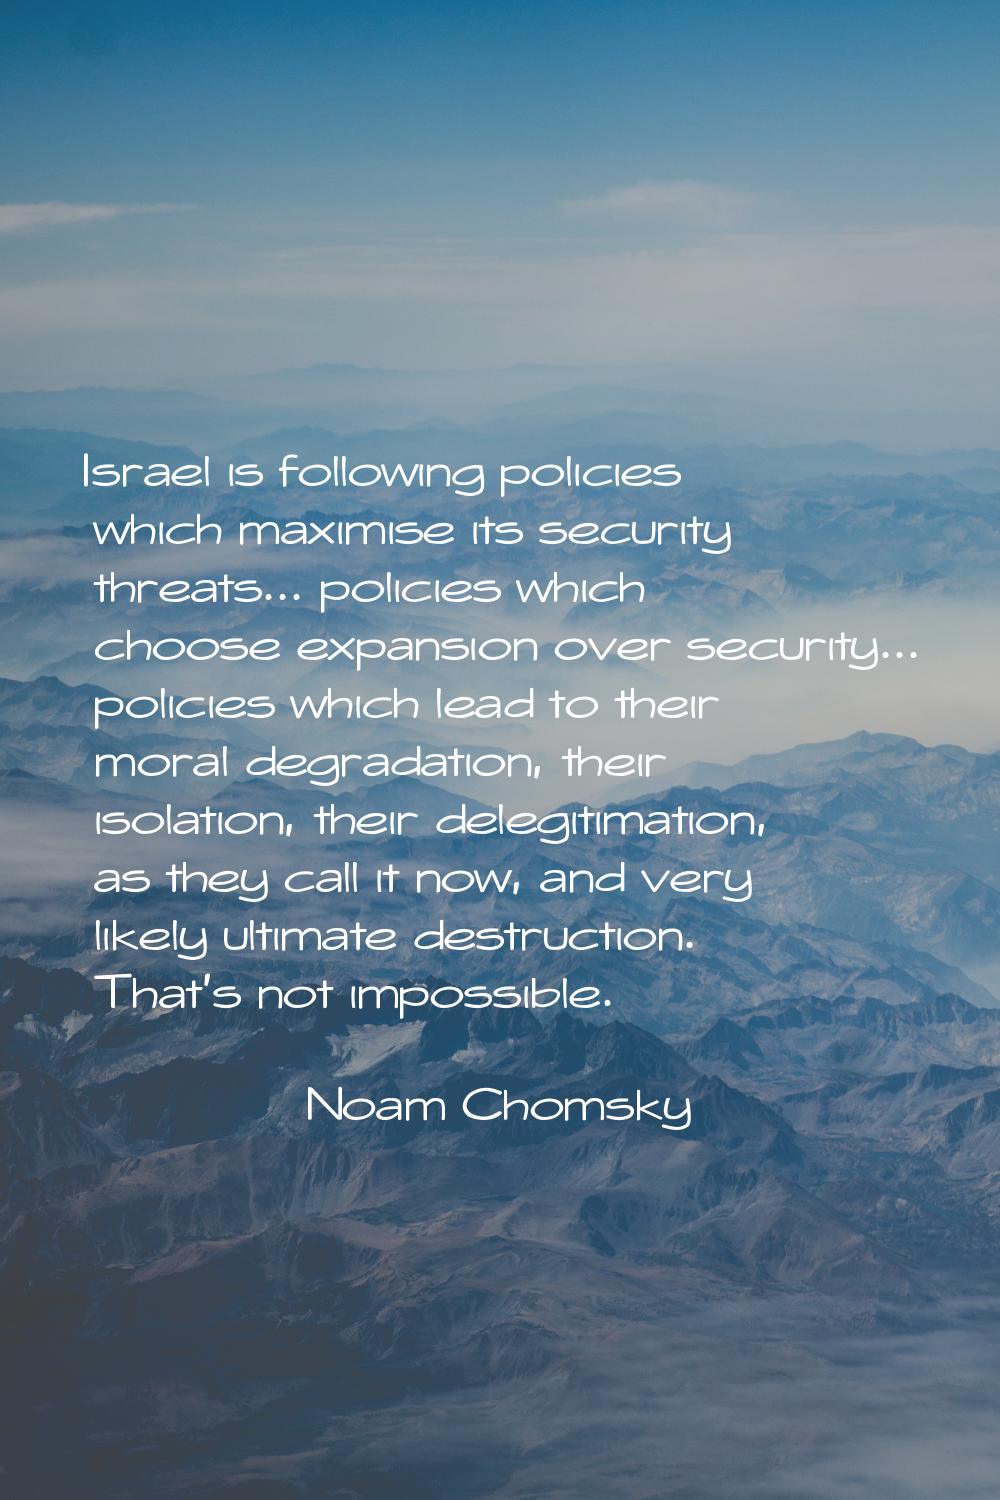 Israel is following policies which maximise its security threats... policies which choose expansion